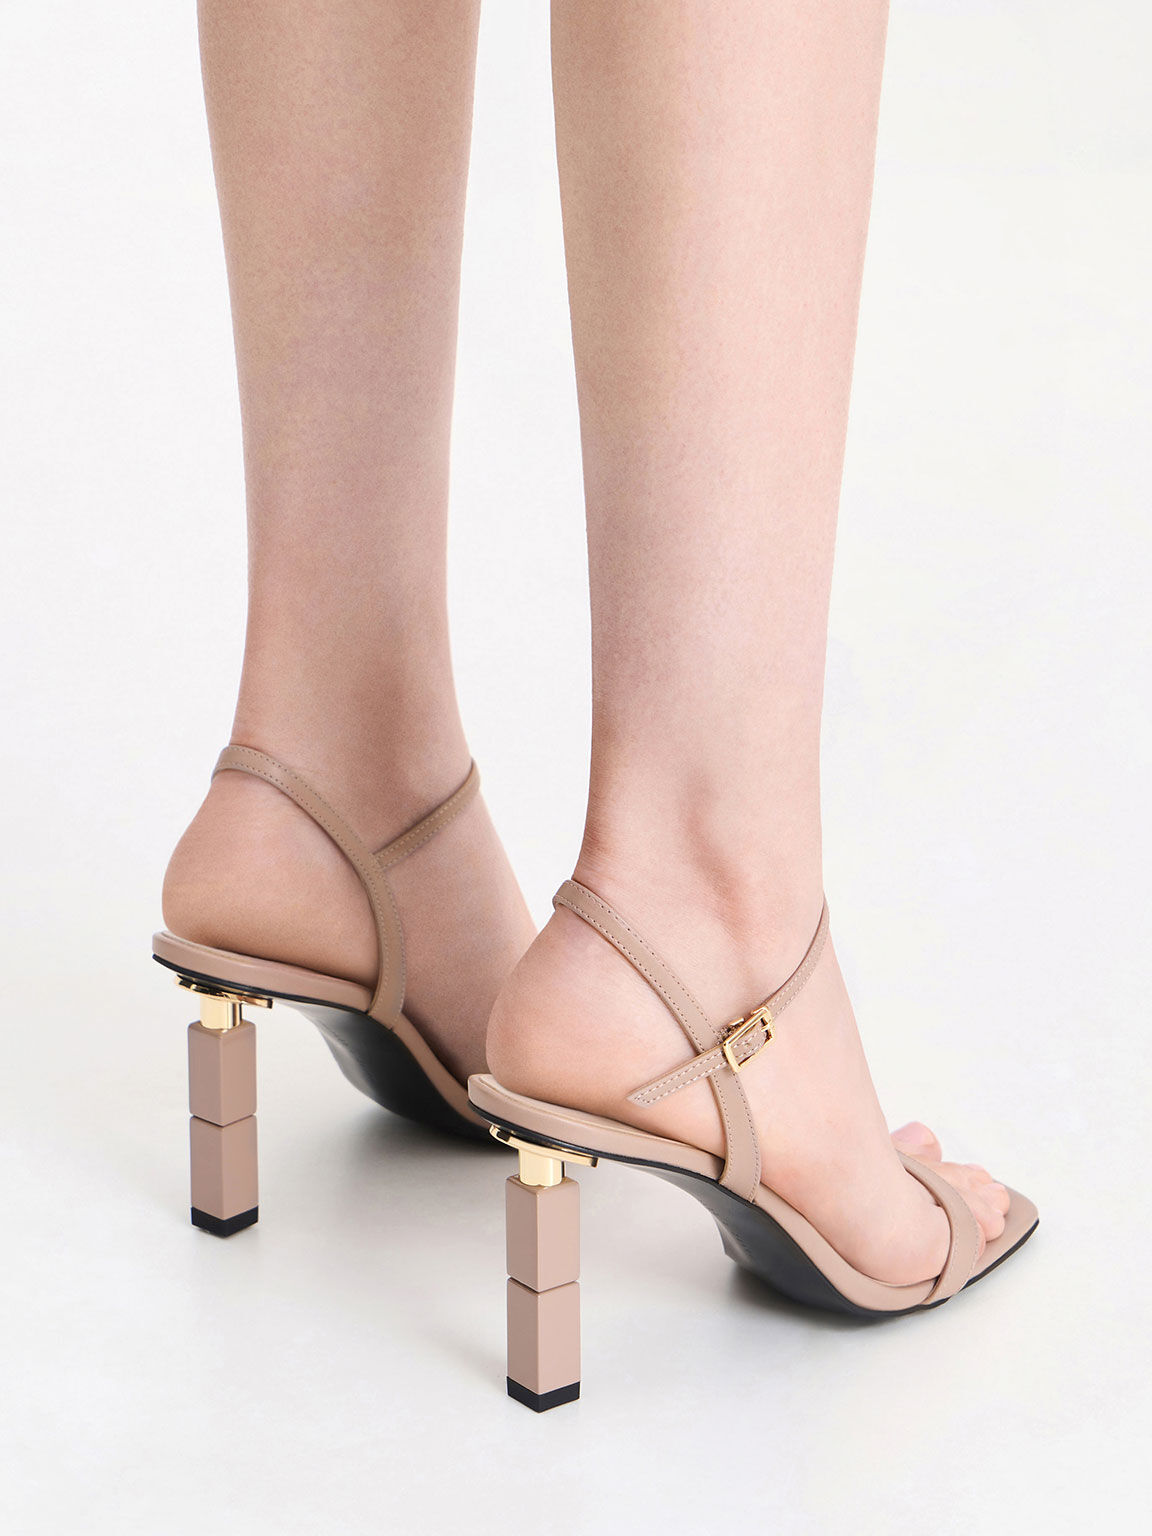 Nude Square-Toe Heeled Sandals - CHARLES & KEITH BS